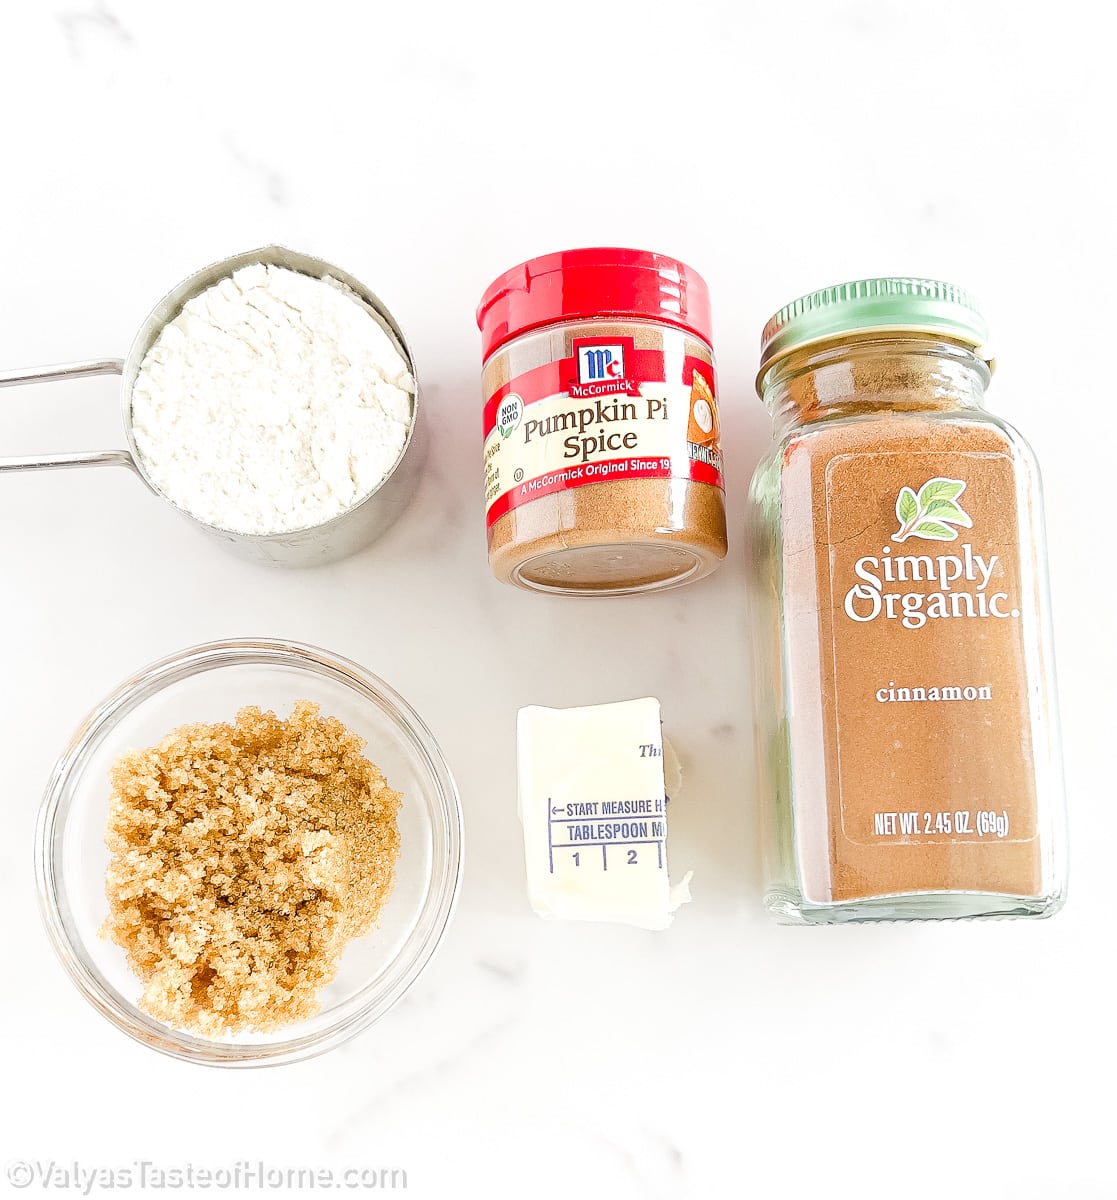 You’ll be needing more all-purpose flour for the crumb topping. This will help create a streusel-like texture and golden-brown crumb topping.